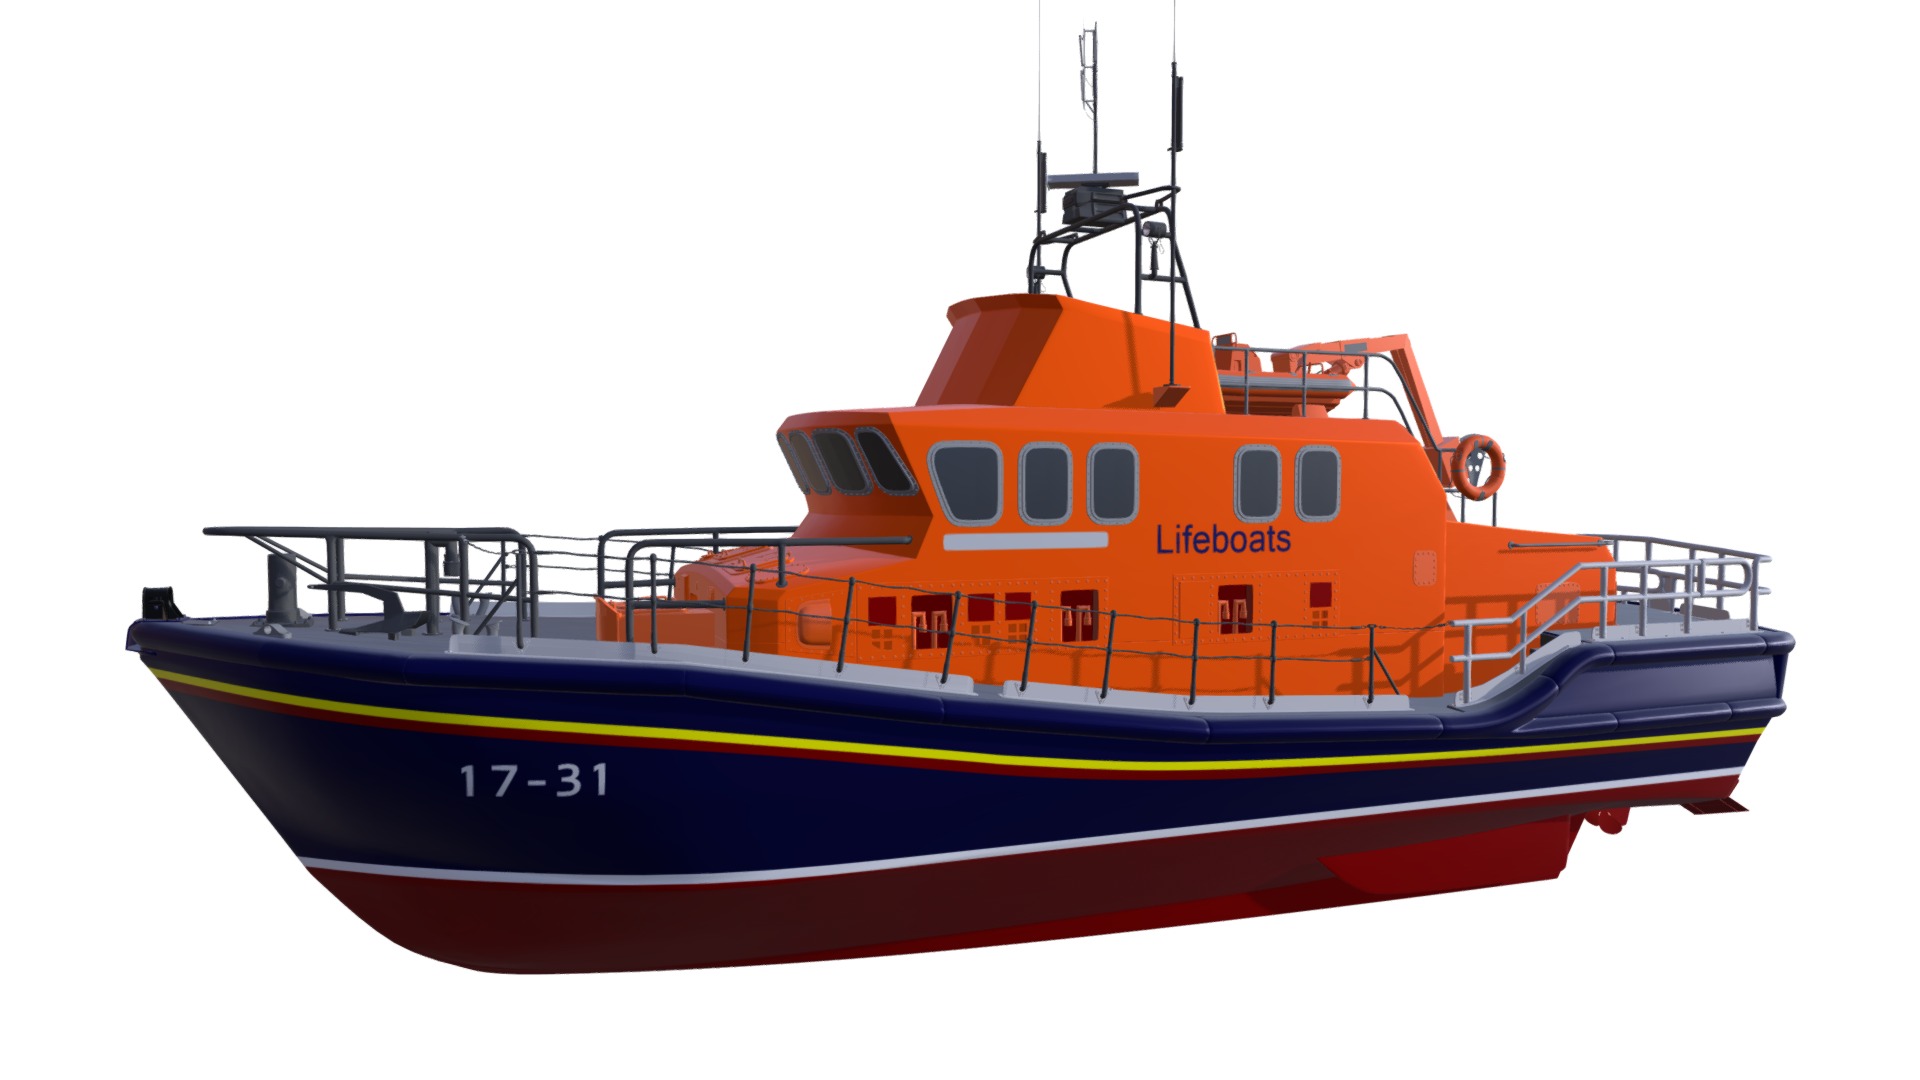 3D model Severn Class Lifeboat - This is a 3D model of the Severn Class Lifeboat. The 3D model is about a large orange and blue boat.